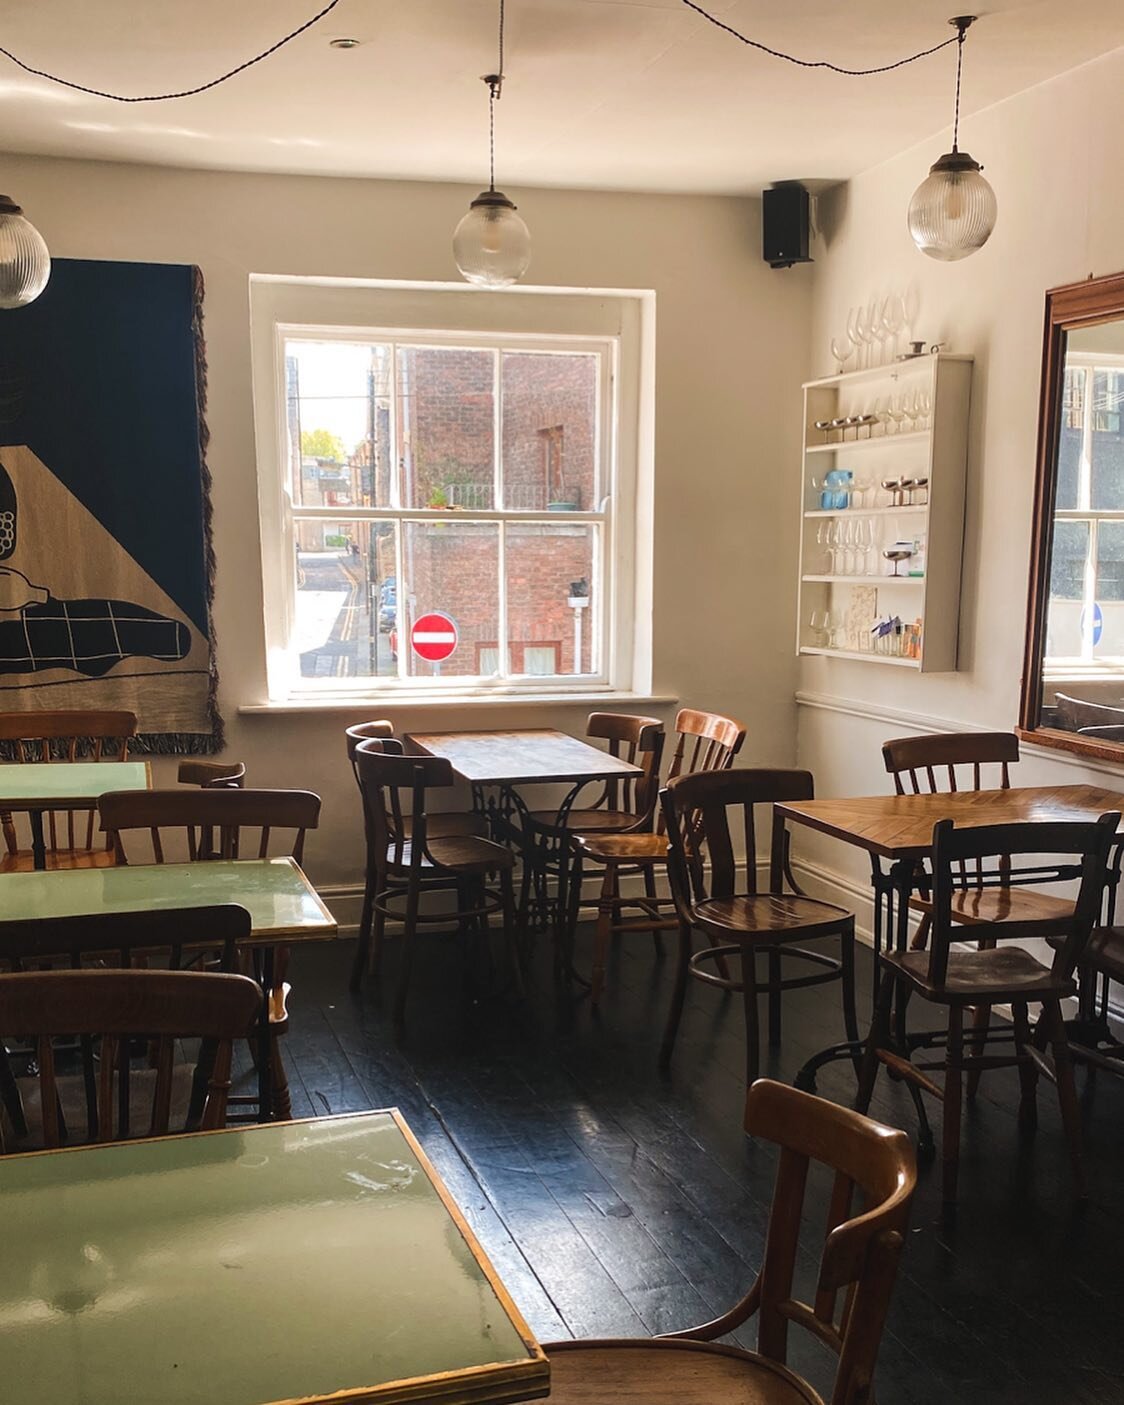 Starting tomorrow, we will be opening upstairs for your coffees and cakes - only on the weekends! It's the same buzz as downstairs, come grab a seat at the window for people watching. No laptops please.